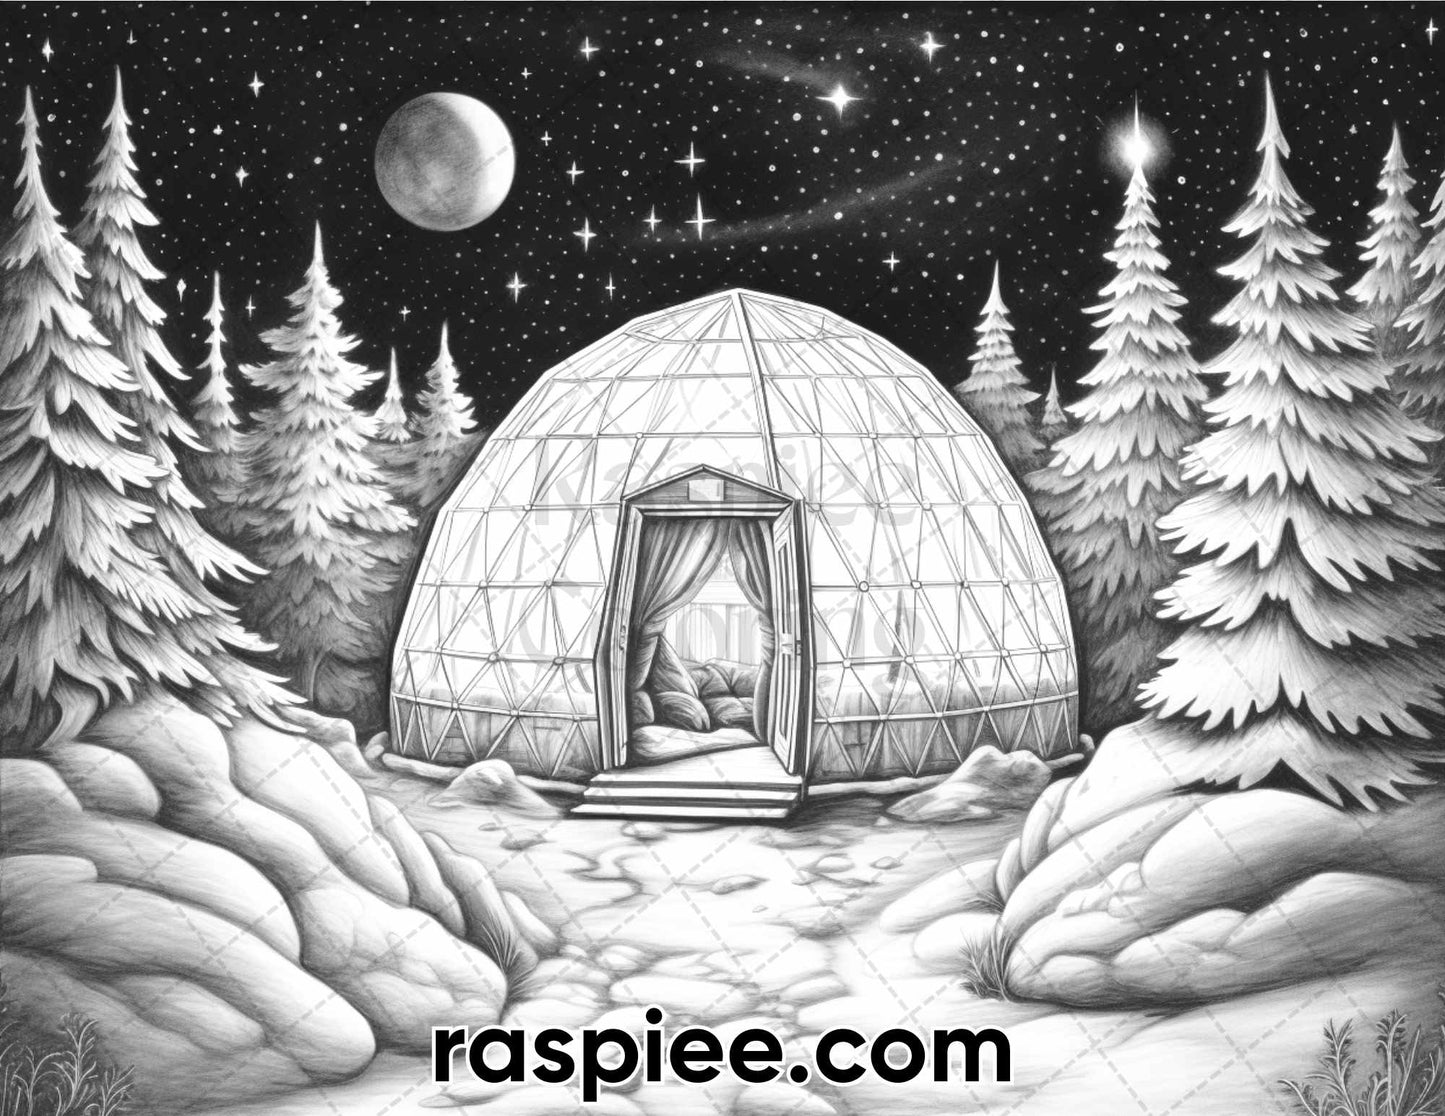 winter coloring pages for adults, landscapes coloring pages for adults, adult coloring pages, adults coloring sheets, adult coloring book printable